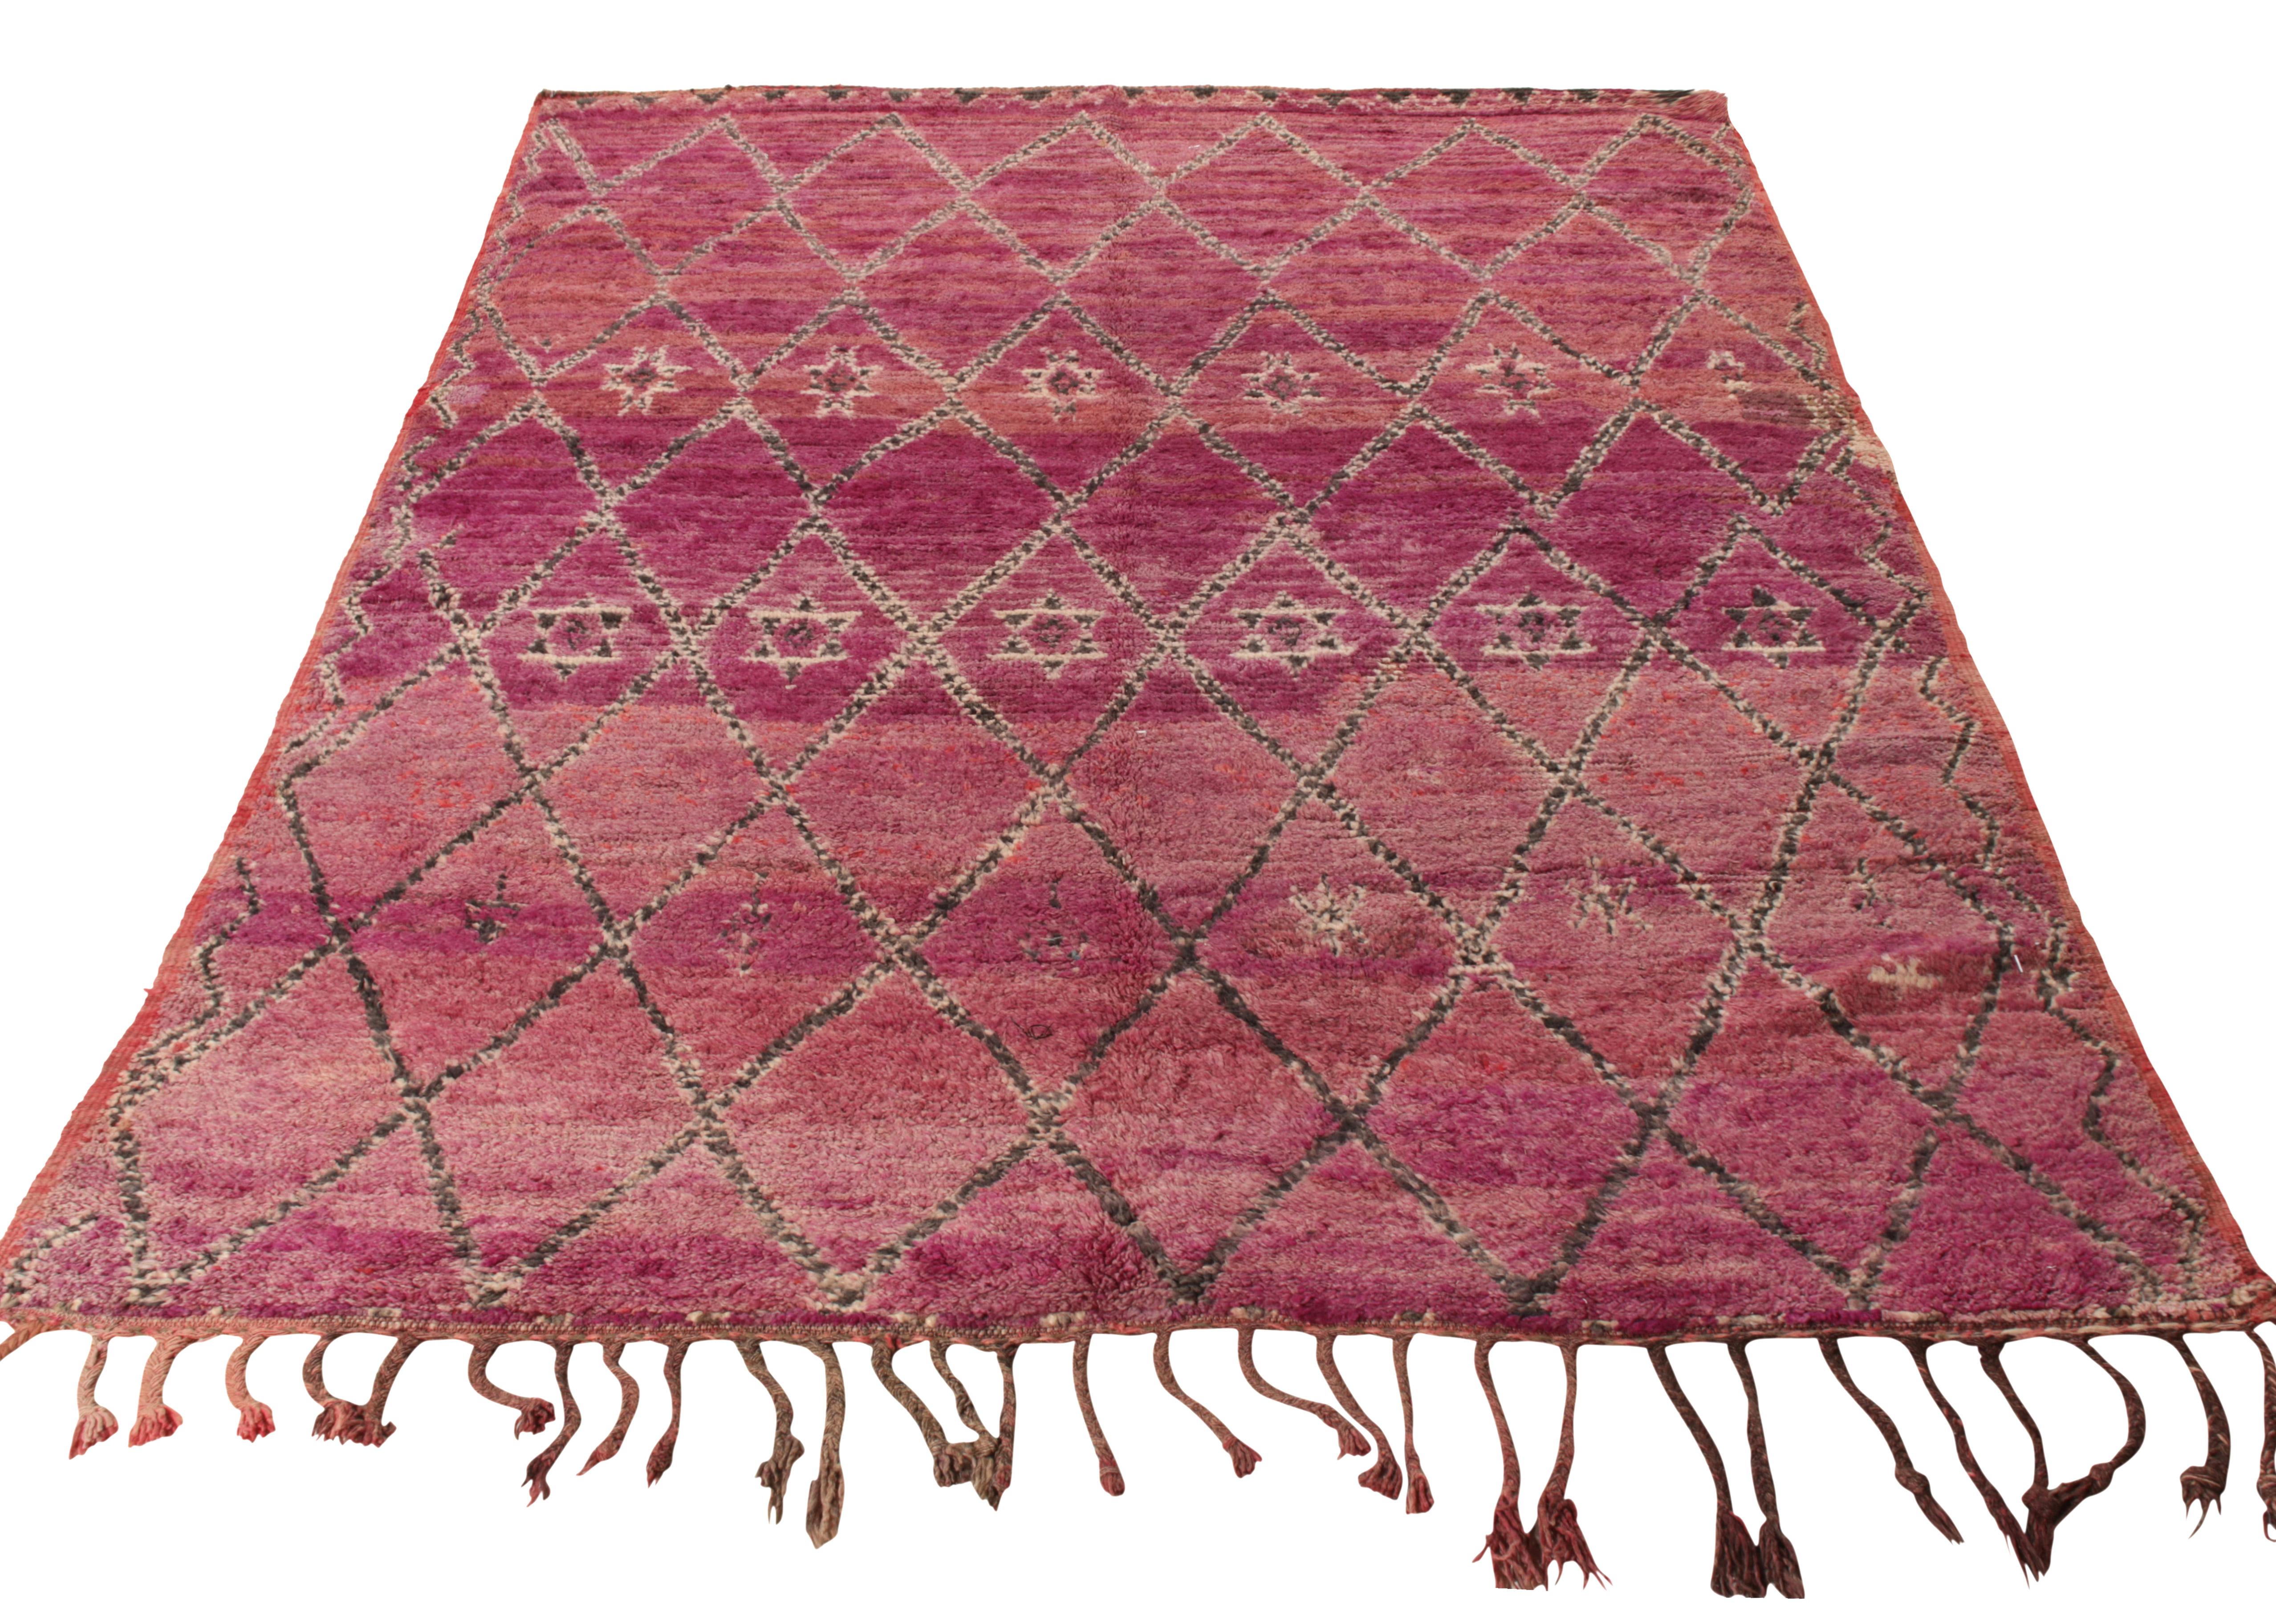 A beautiful, hand-knotted vintage 7x10 Moroccan rug, originating circa 1950-1960. Flourishing in a gracious scale, the rug originating from a particular community of Moroccan Jews who were rarely seen owning looms or making carpets, especially